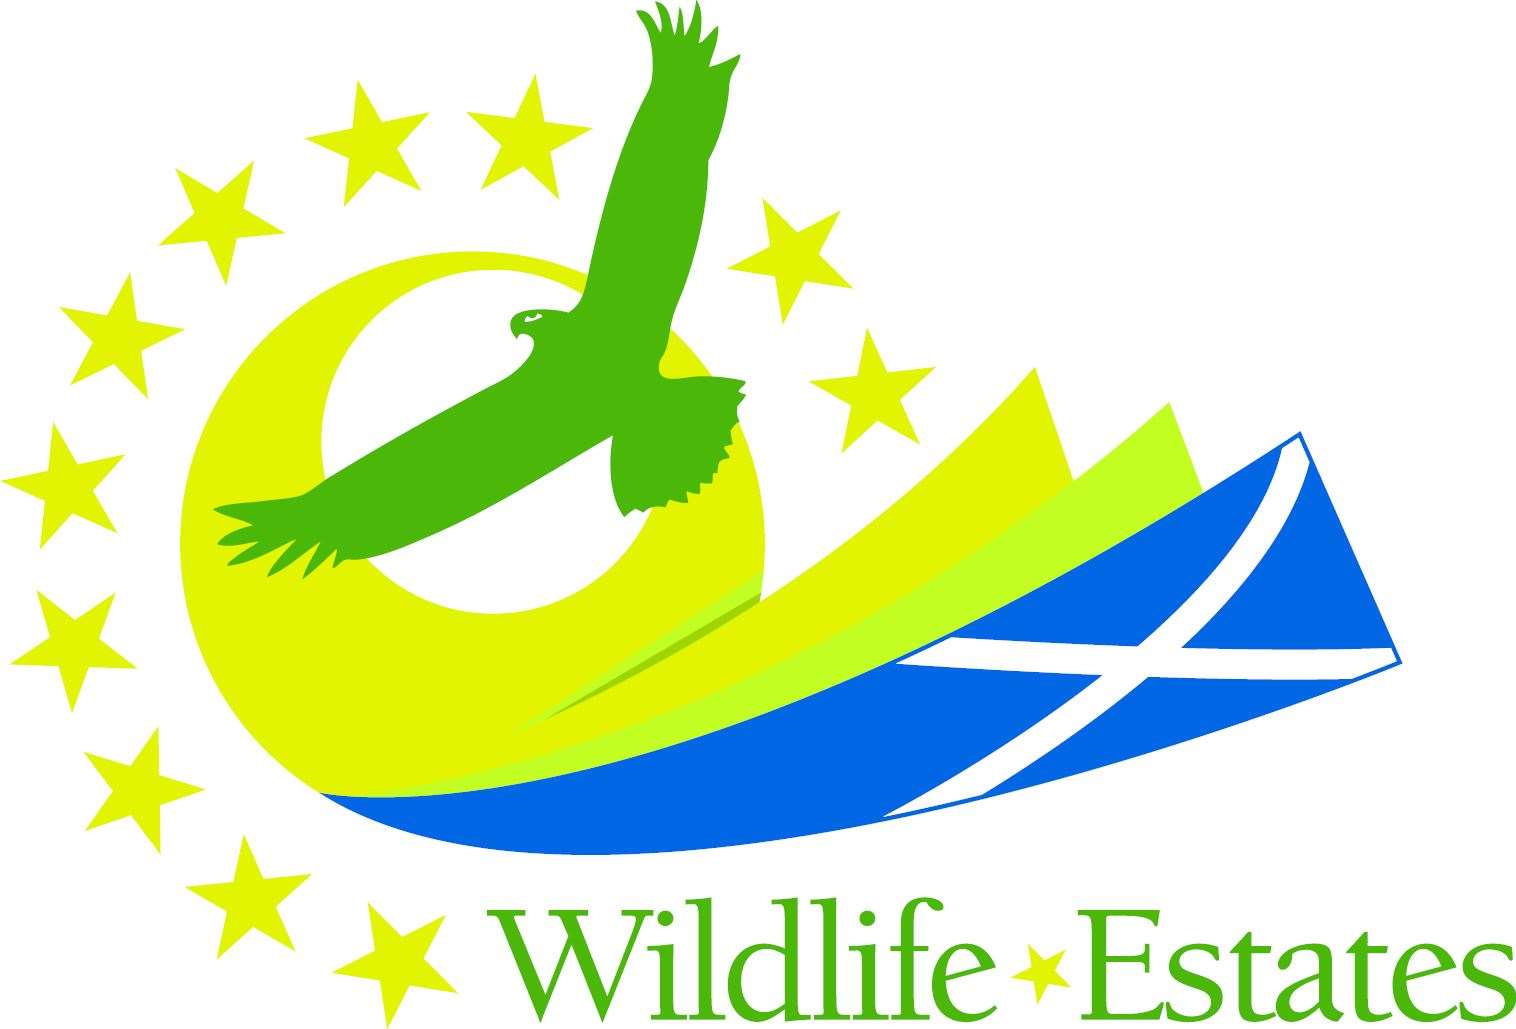 Glendoe Estate near Loch Ness has received Wildlife Estates Scotland (WES) re-accreditation for its ongoing wildlife management and conservation work.